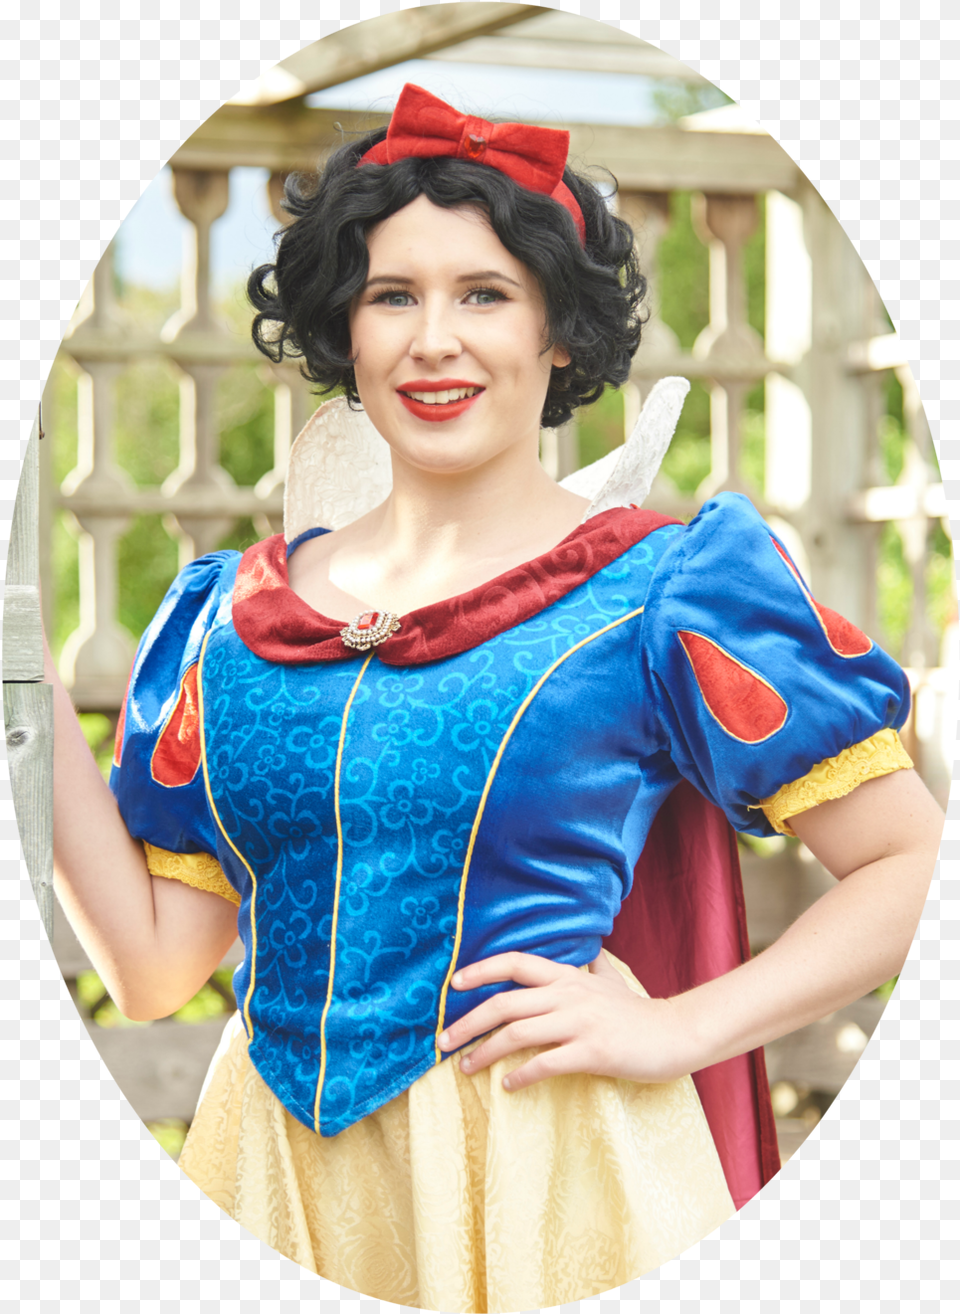 Snow White Portable Network Graphics, Clothing, Costume, Photography, Person Png Image